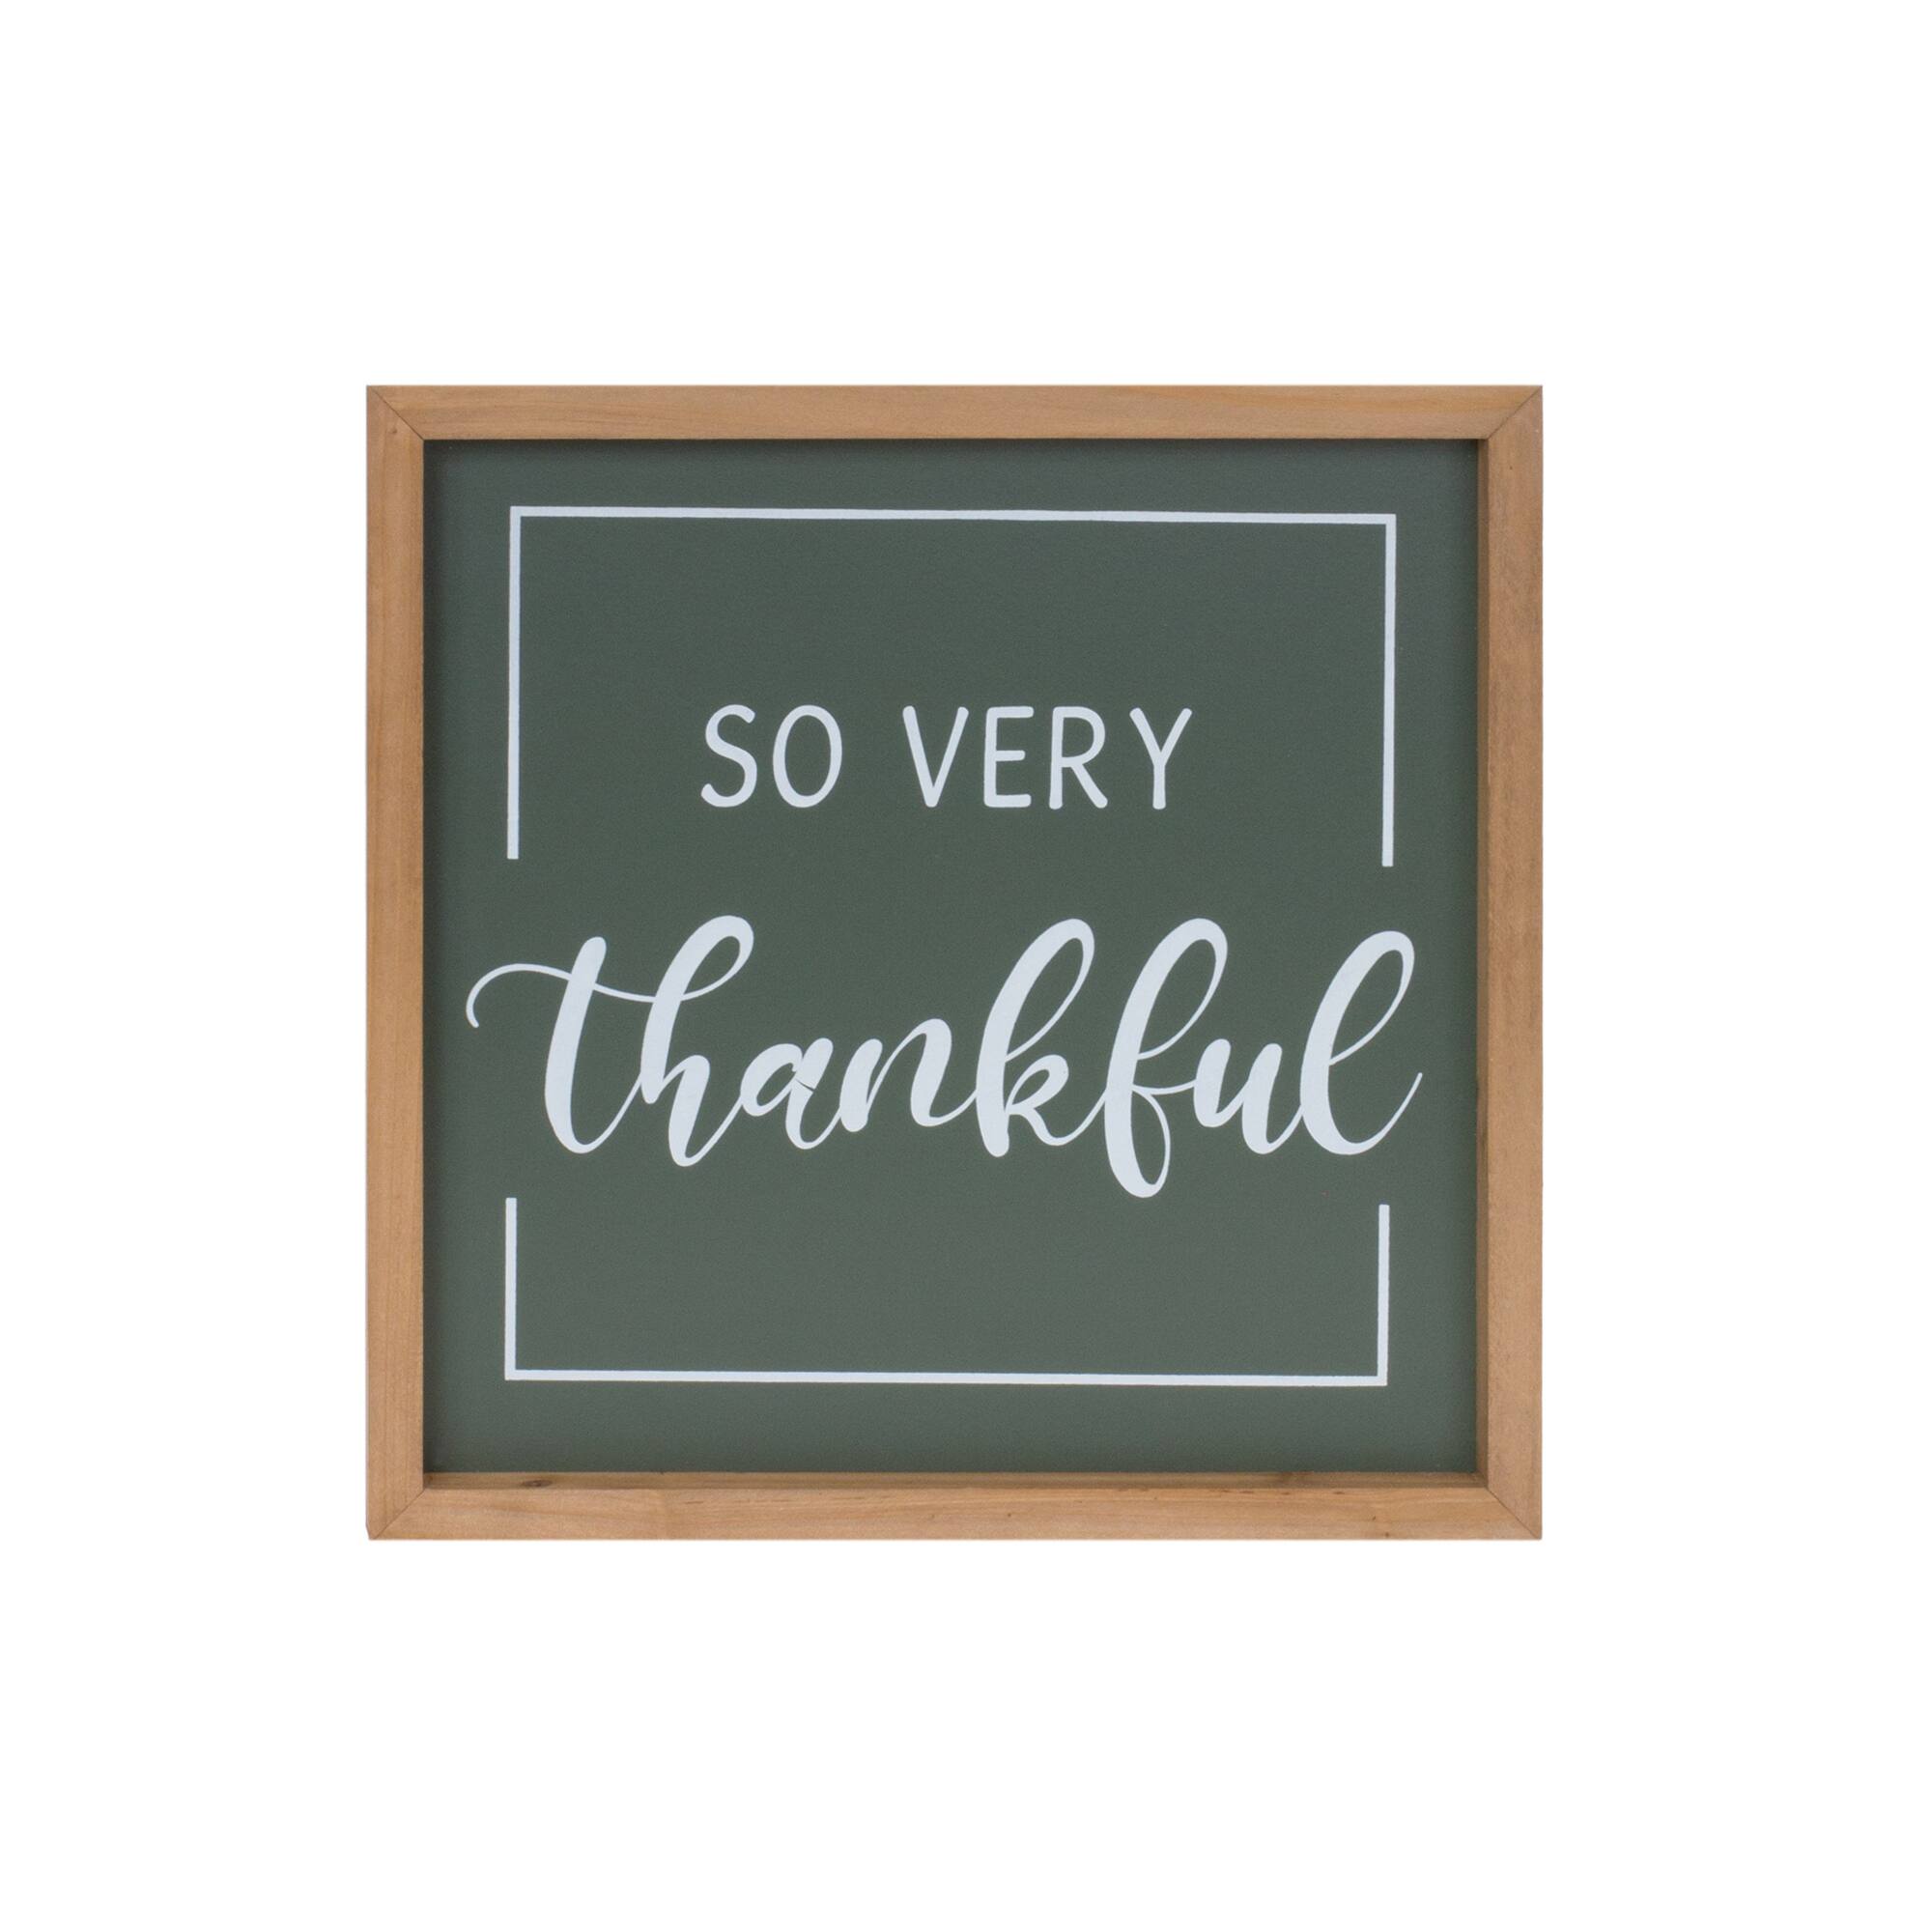 Gather and Thankful Sentiment Sign Set